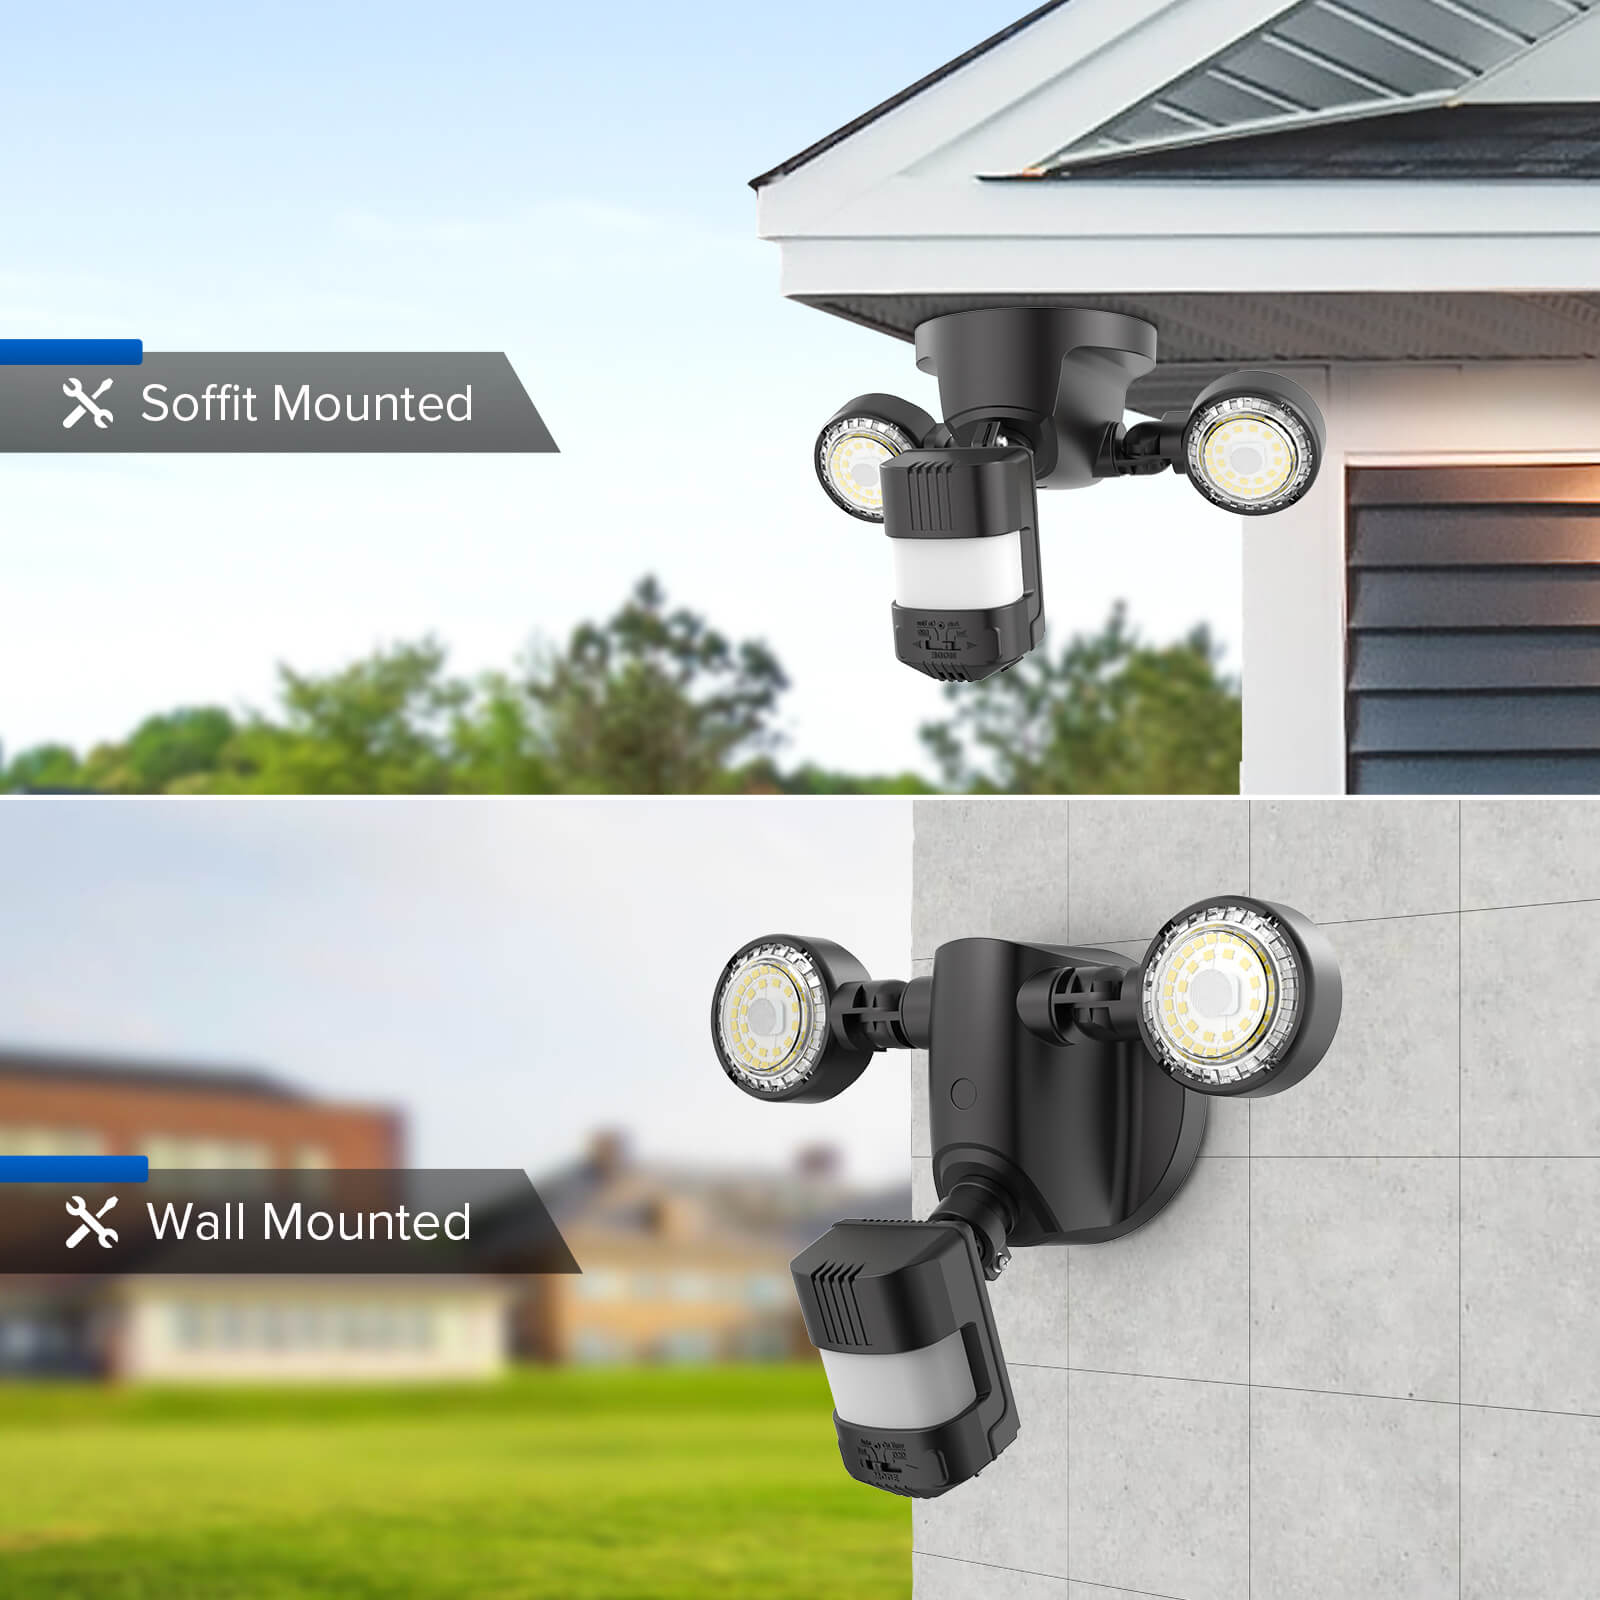 25W LED Security Light (Dusk to Dawn & Motion Sensor) can be mounted soffit and wall